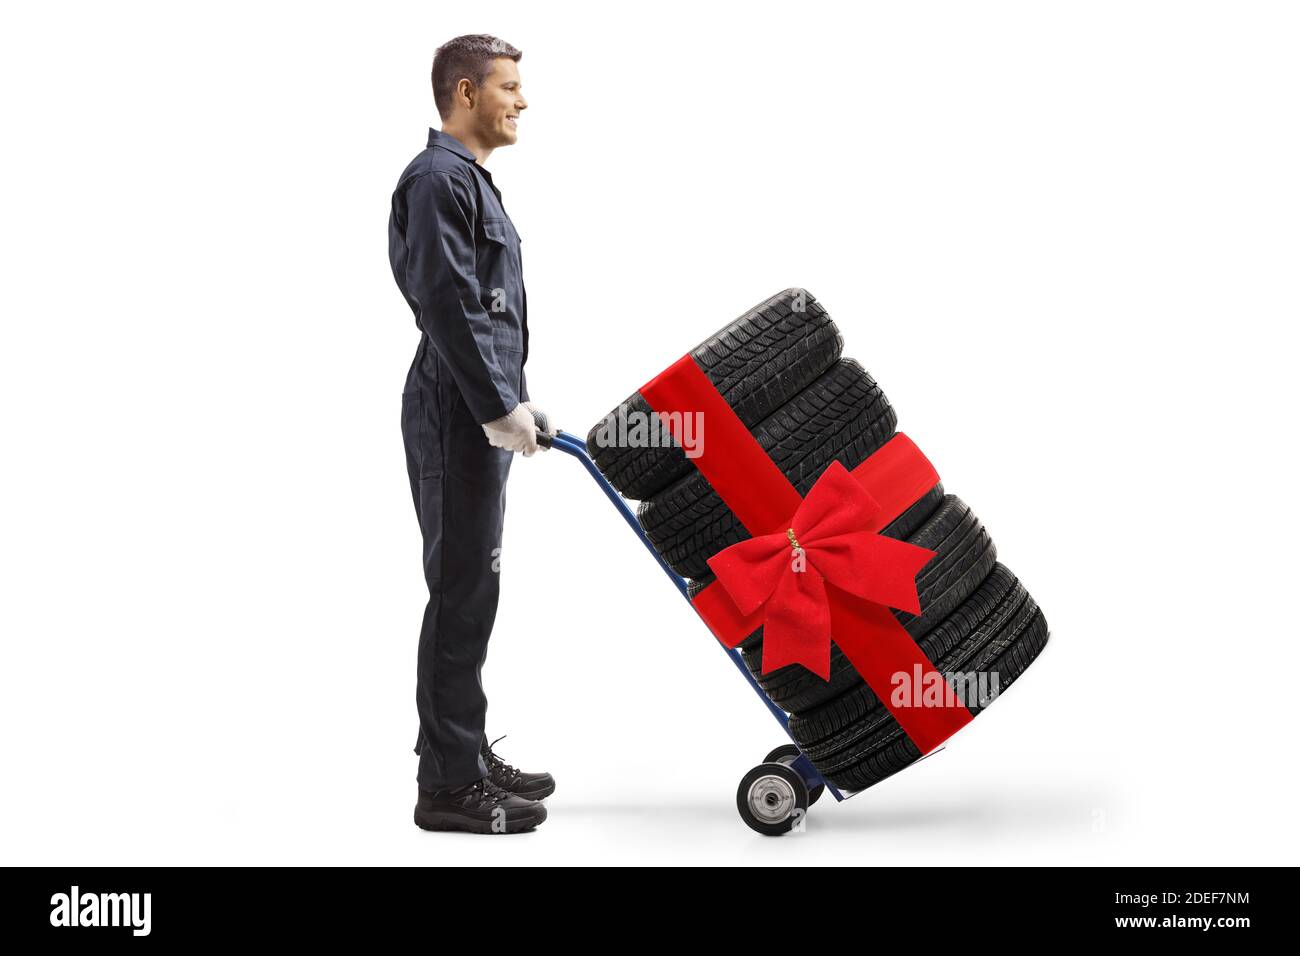 Full length profile shot of a mechanic worker pushing car tires with a red bow on a hand truck isolated on white background Stock Photo